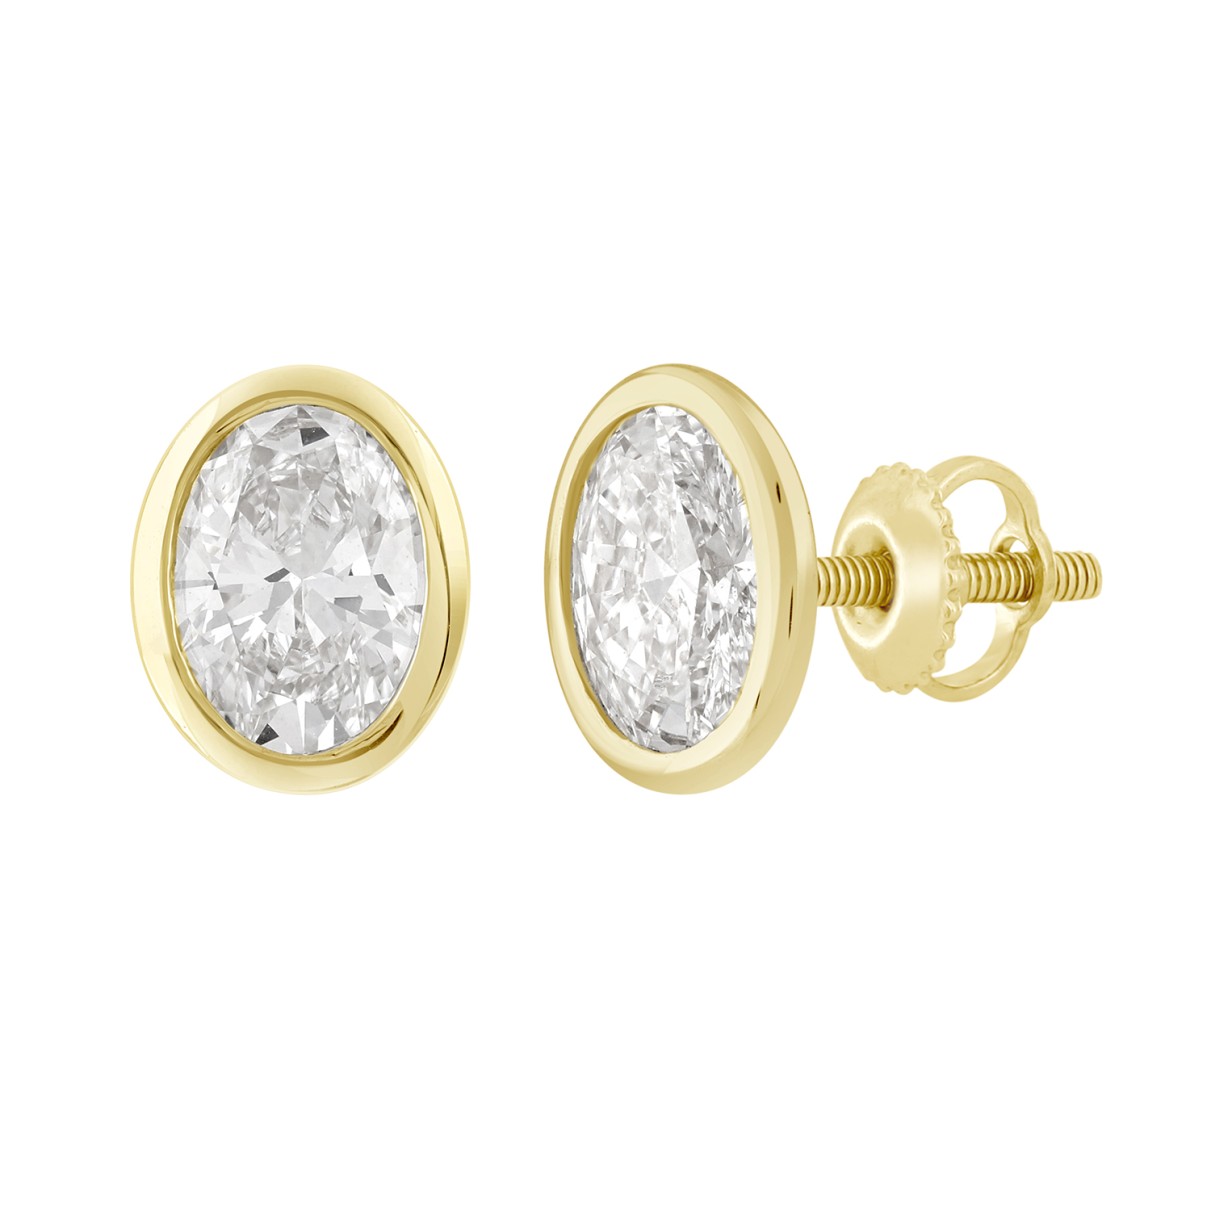 LADIES SOLITAIRE EARRINGS  3CT OVAL DIAMOND 14K YELLOW GOLD